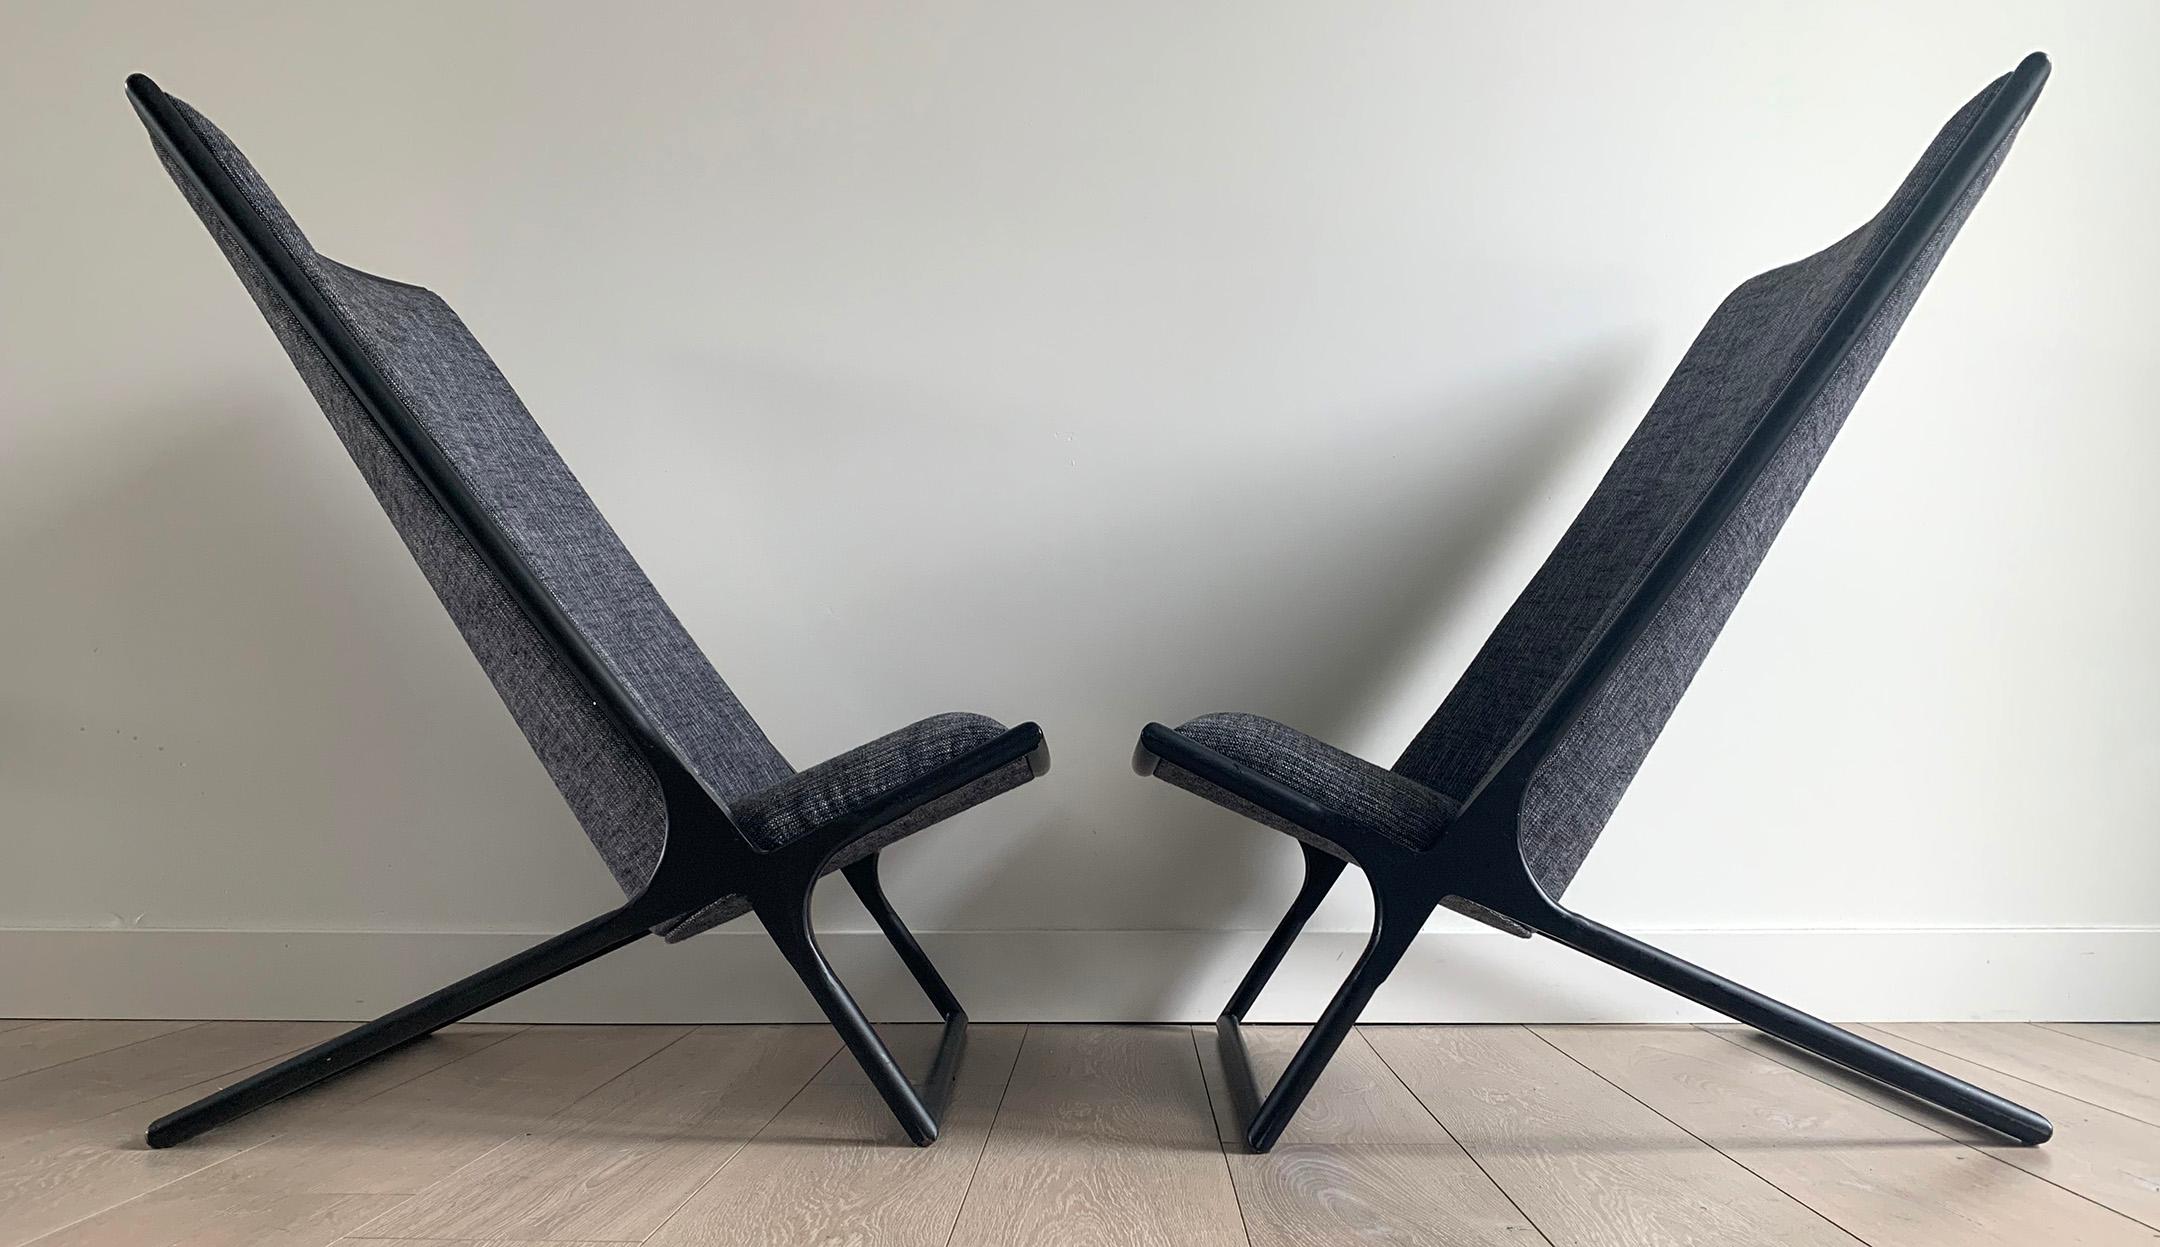 These chairs are simply stunning.  Priced for the pair, a pair of Ward Bennett for Brickel Associates scissor chairs. The chairs are upholstered in a soft, tweed-y looking great fabric with white threading accents. The frames are a striking satin